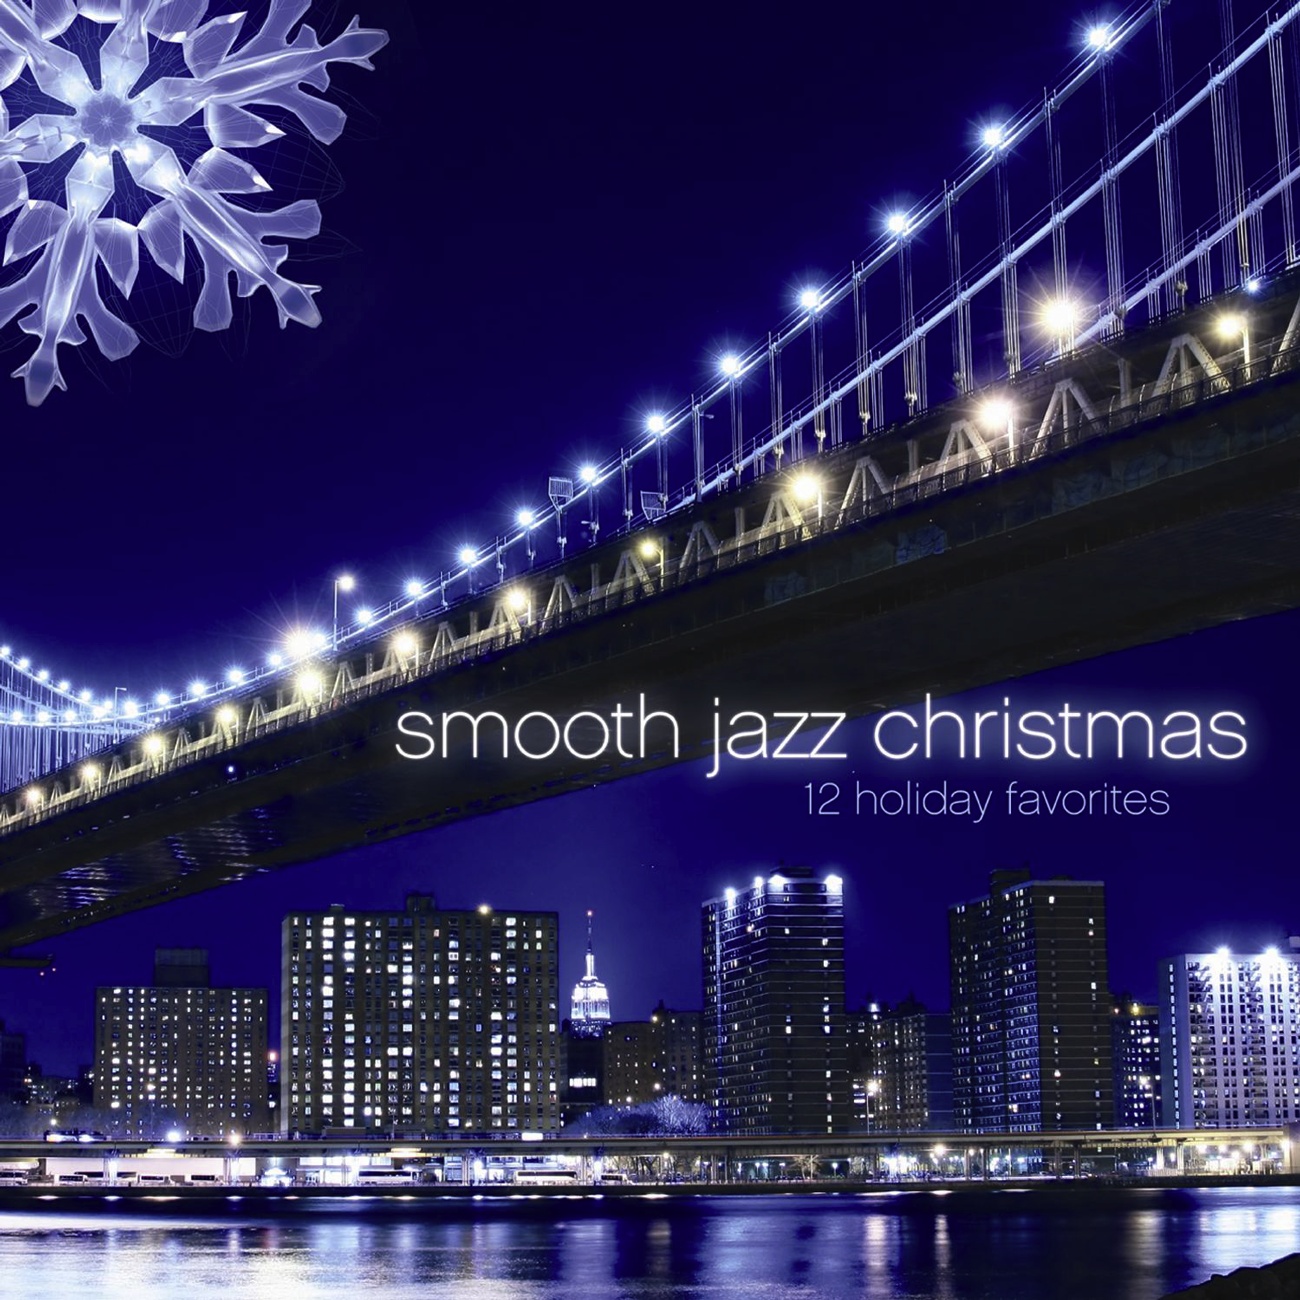 The First Noel (Smooth Jazz Christmas)